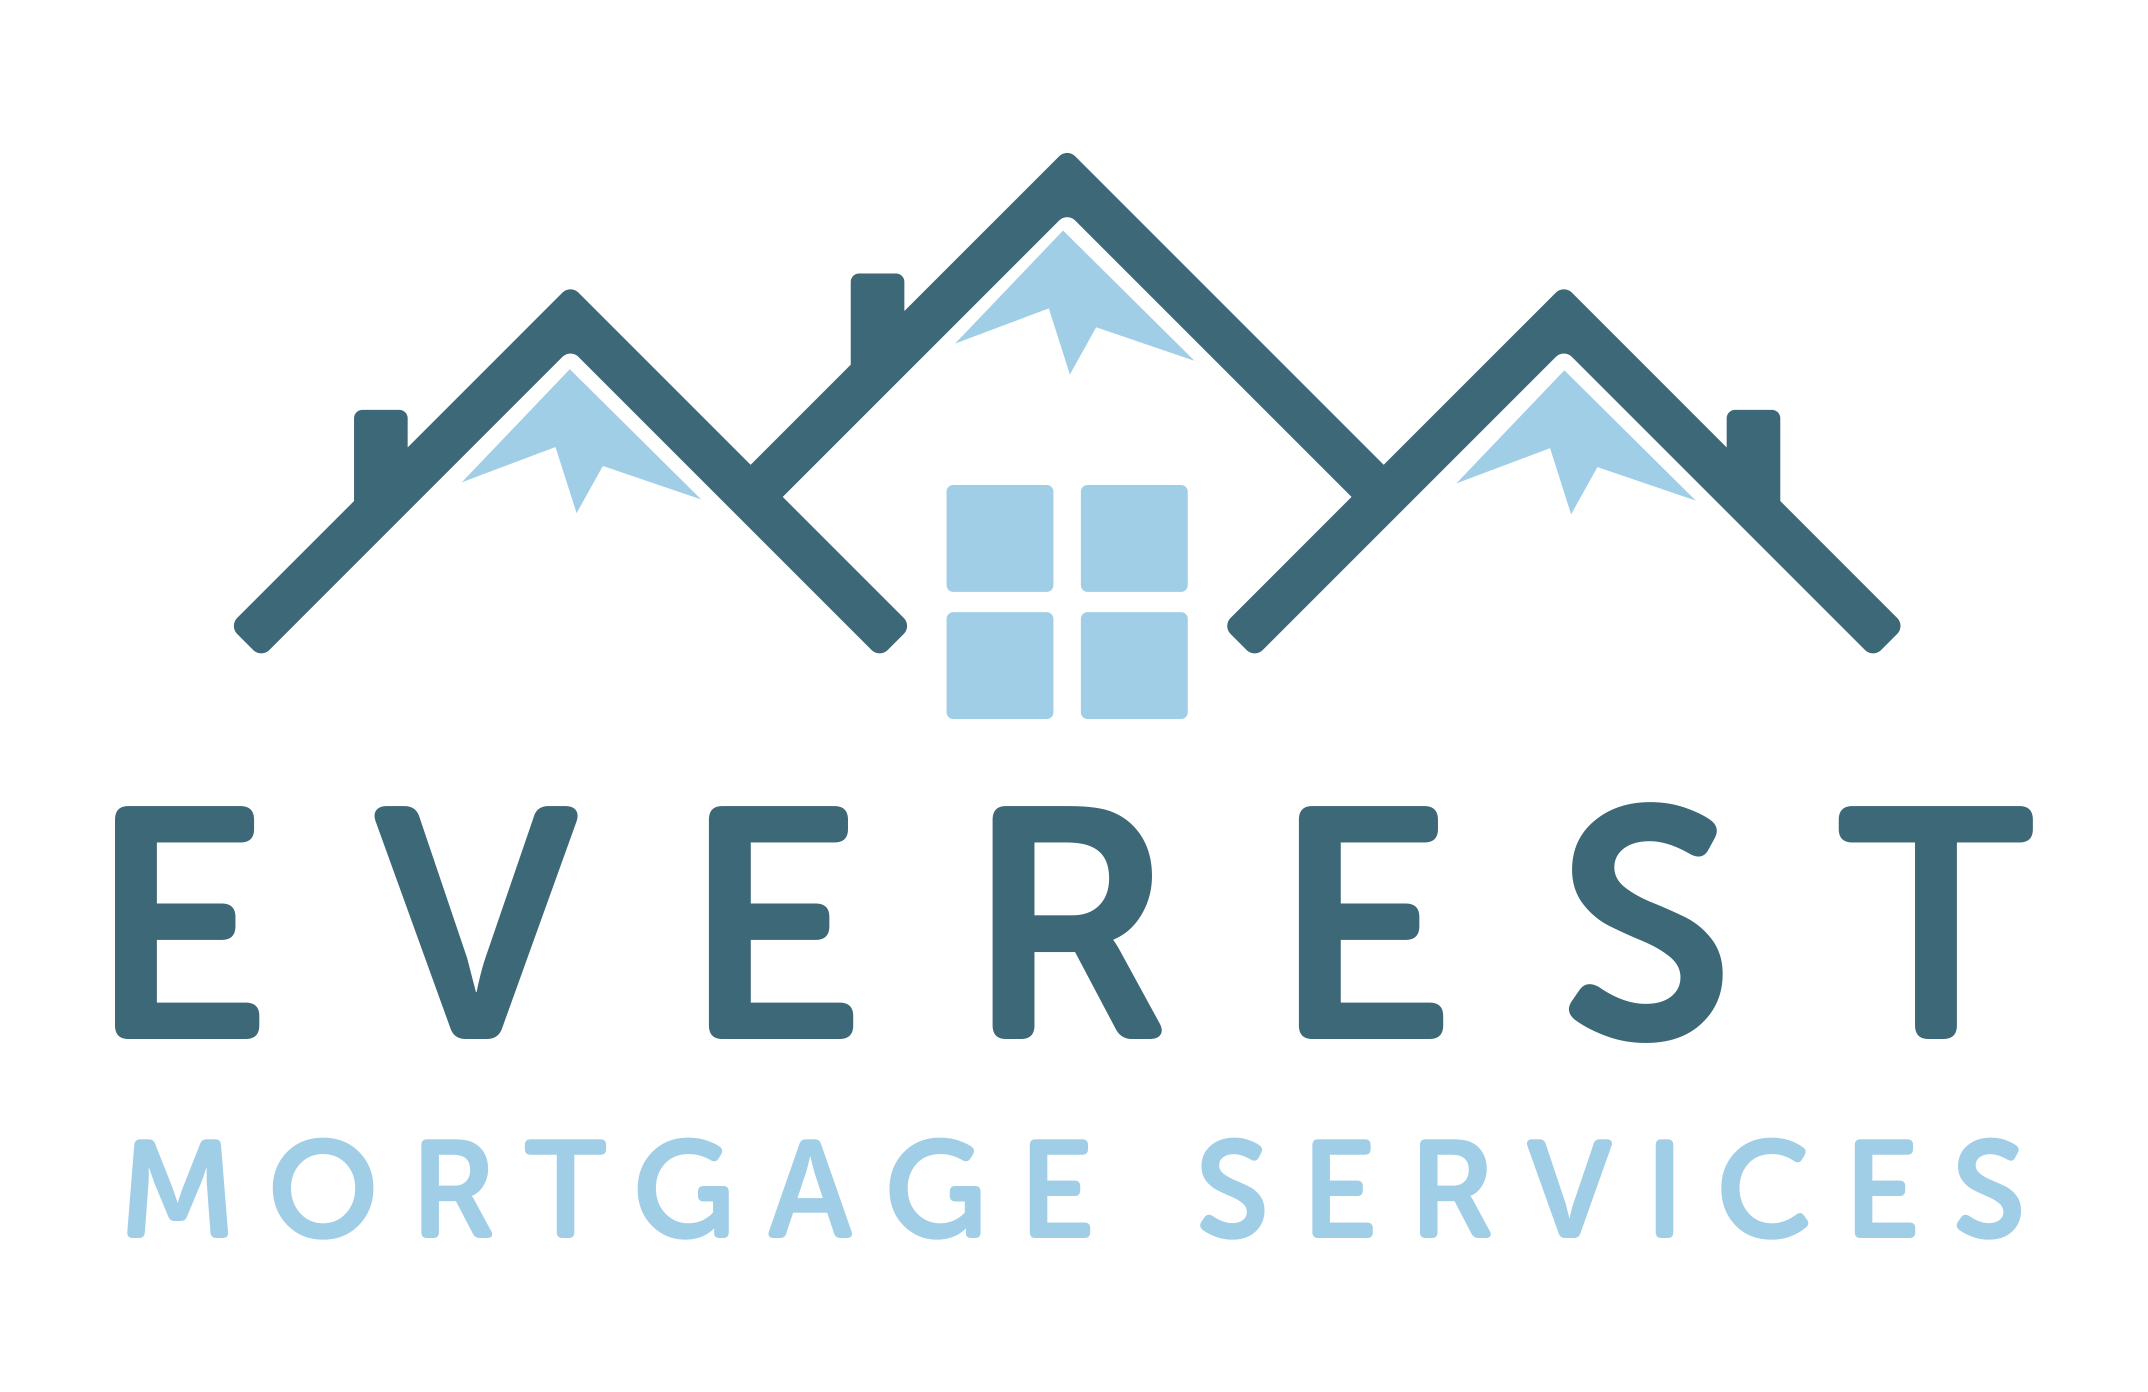 Everest Mortgages